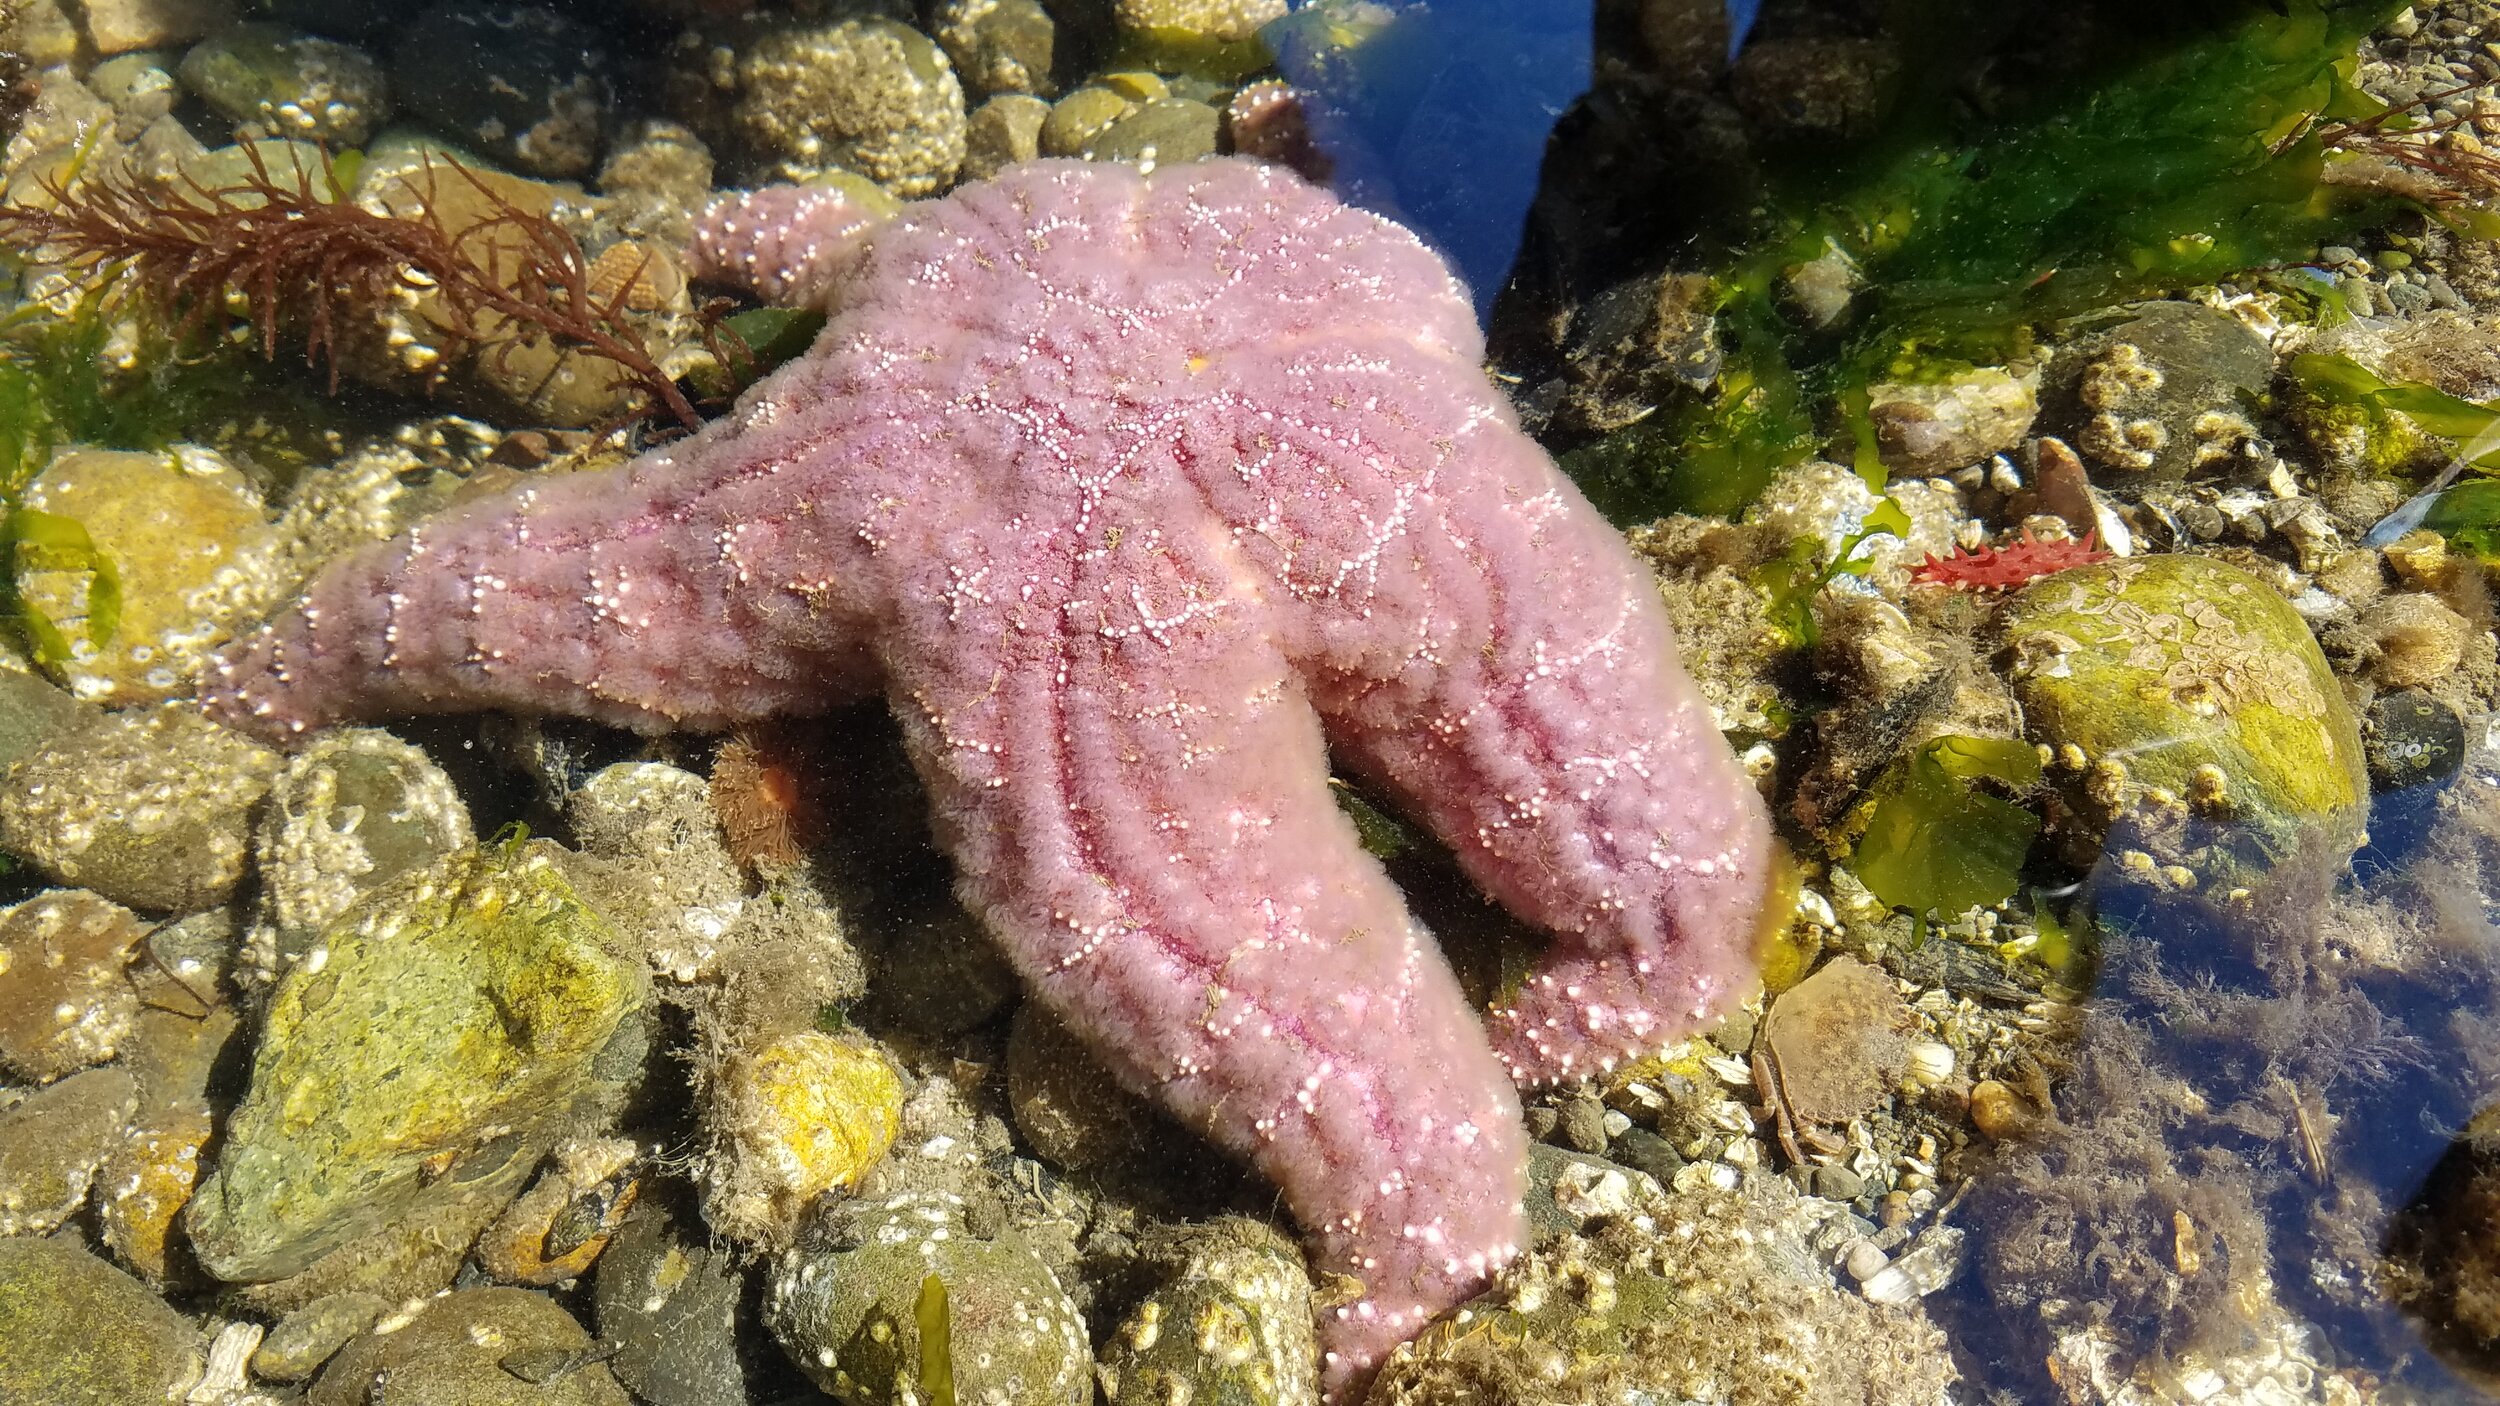  Ocre sea star, observed during a field visit. 